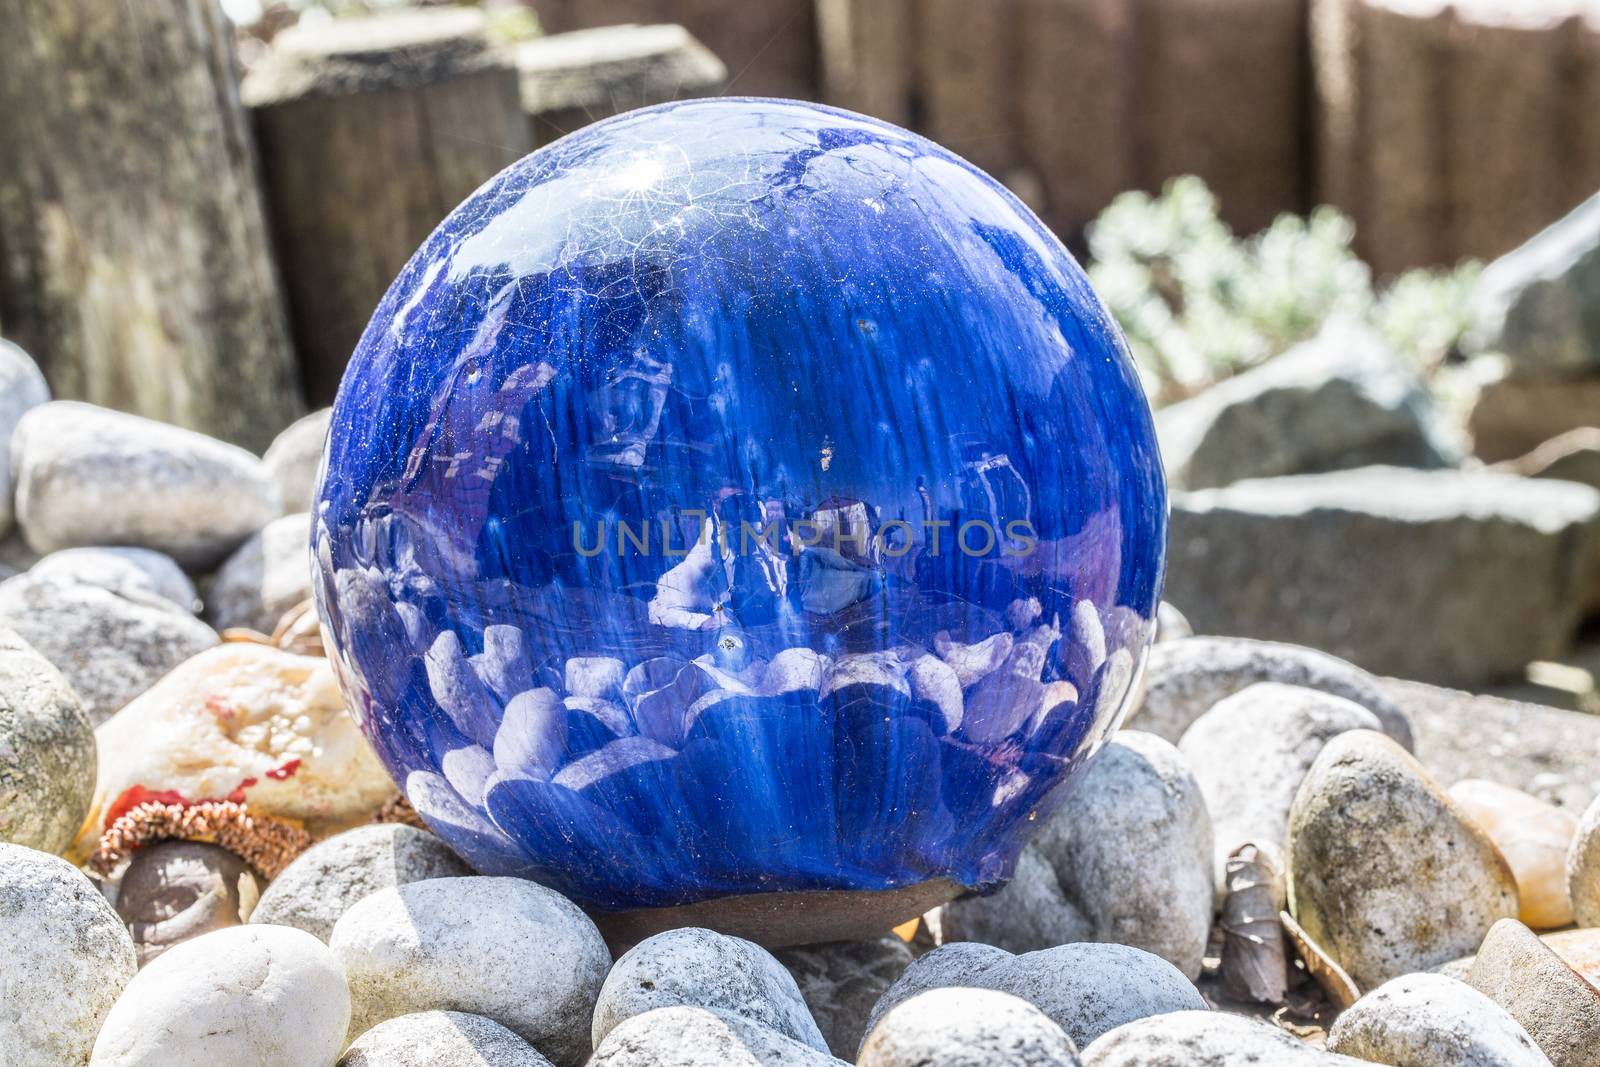 blue glass ball in the gravel bed